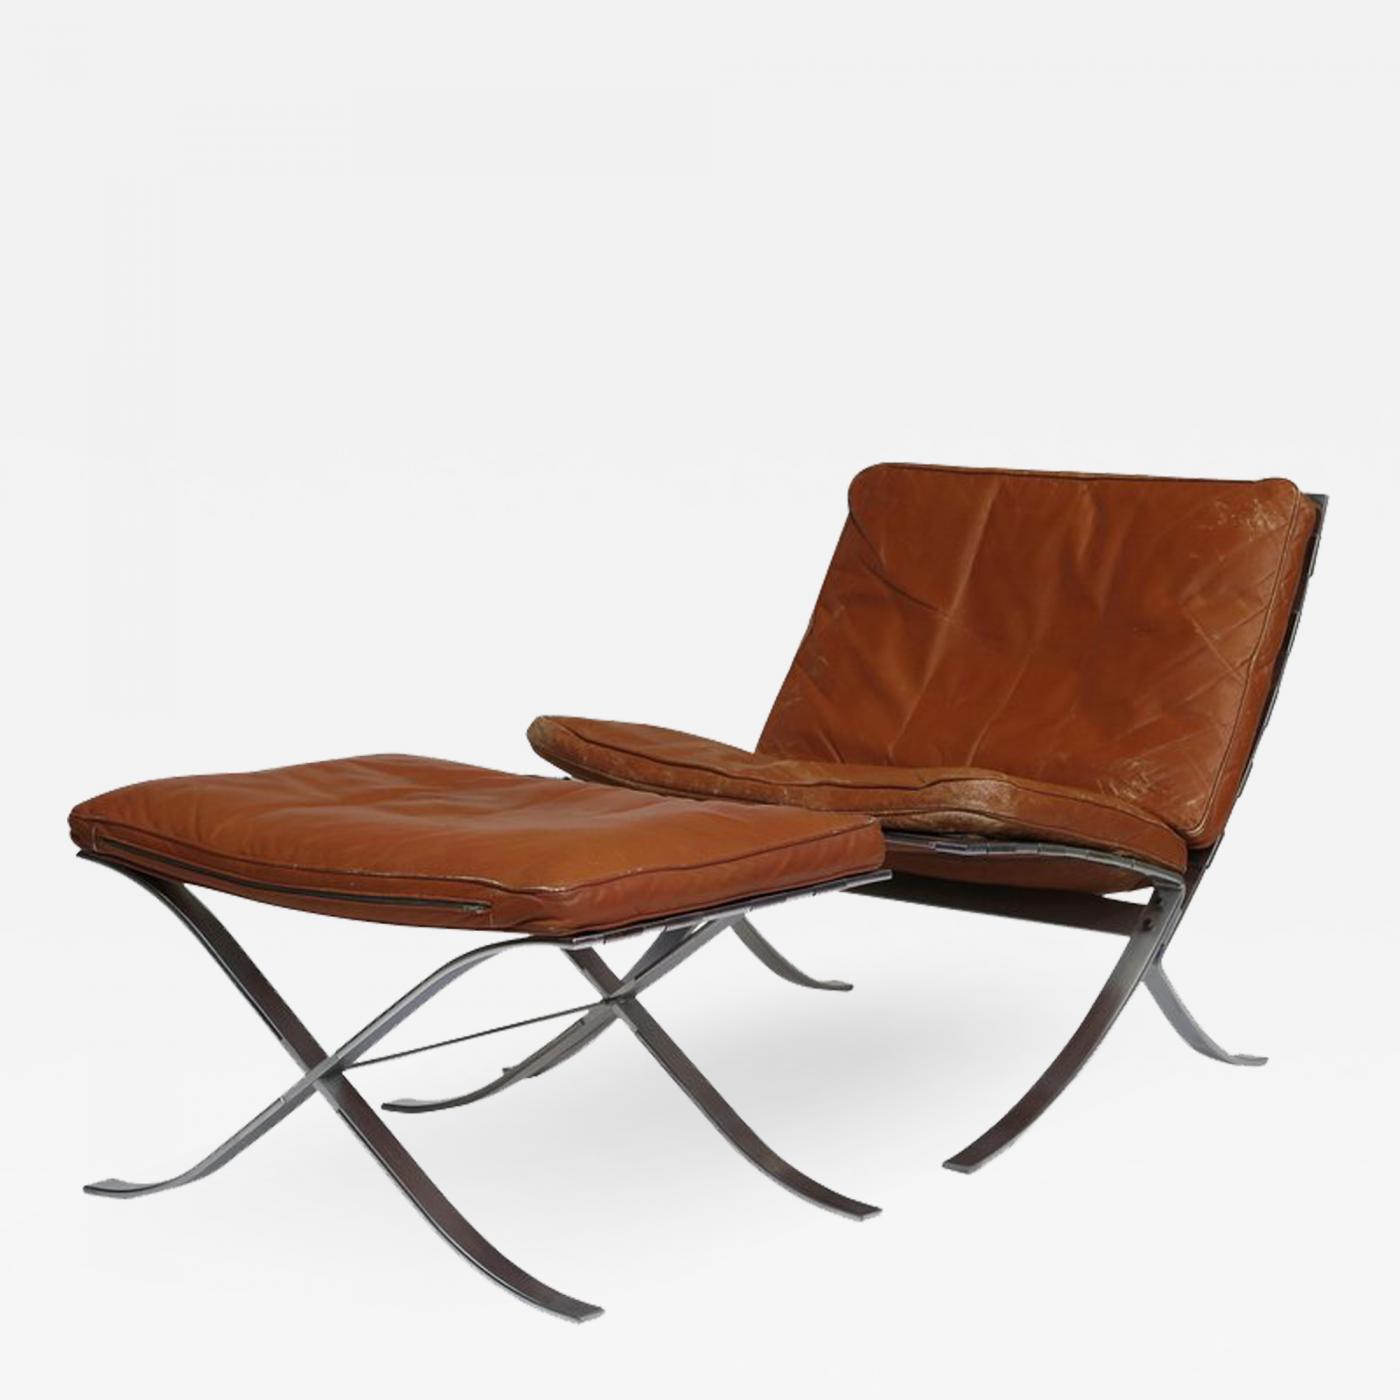 https://cdn.incollect.com/sites/default/files/zoom/Steen-Ostergaard-Steel-and-Leather-Lounge-Chair-Foot-Stool-300429-970953.jpg